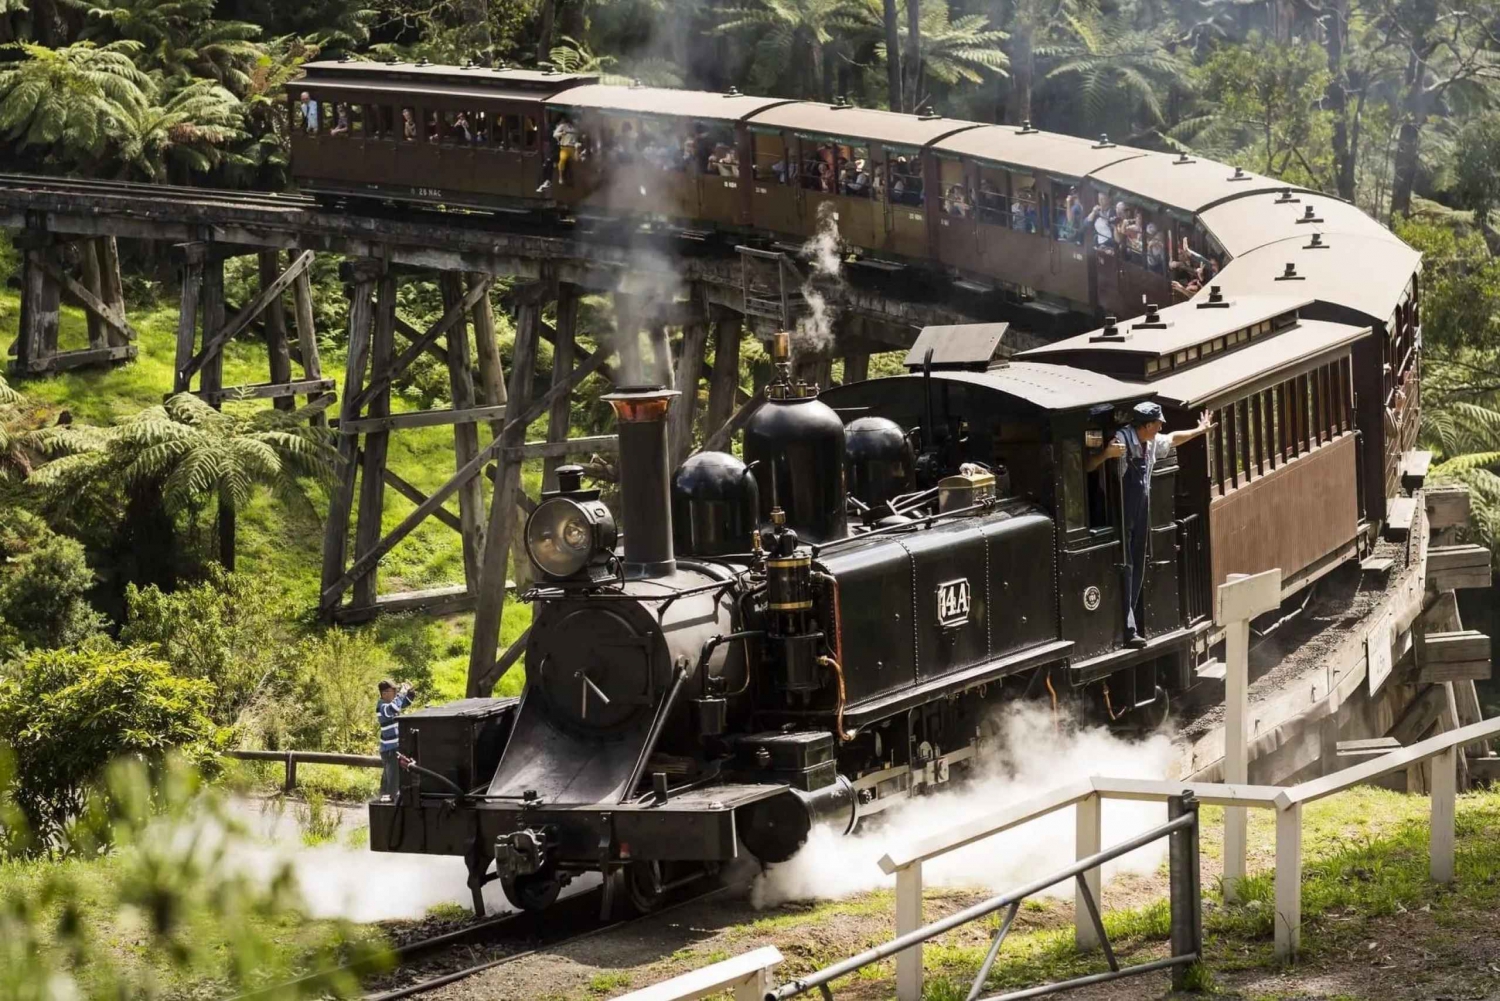 YARRA VALLEY’S WINE TASTING & PUFFING BILLY